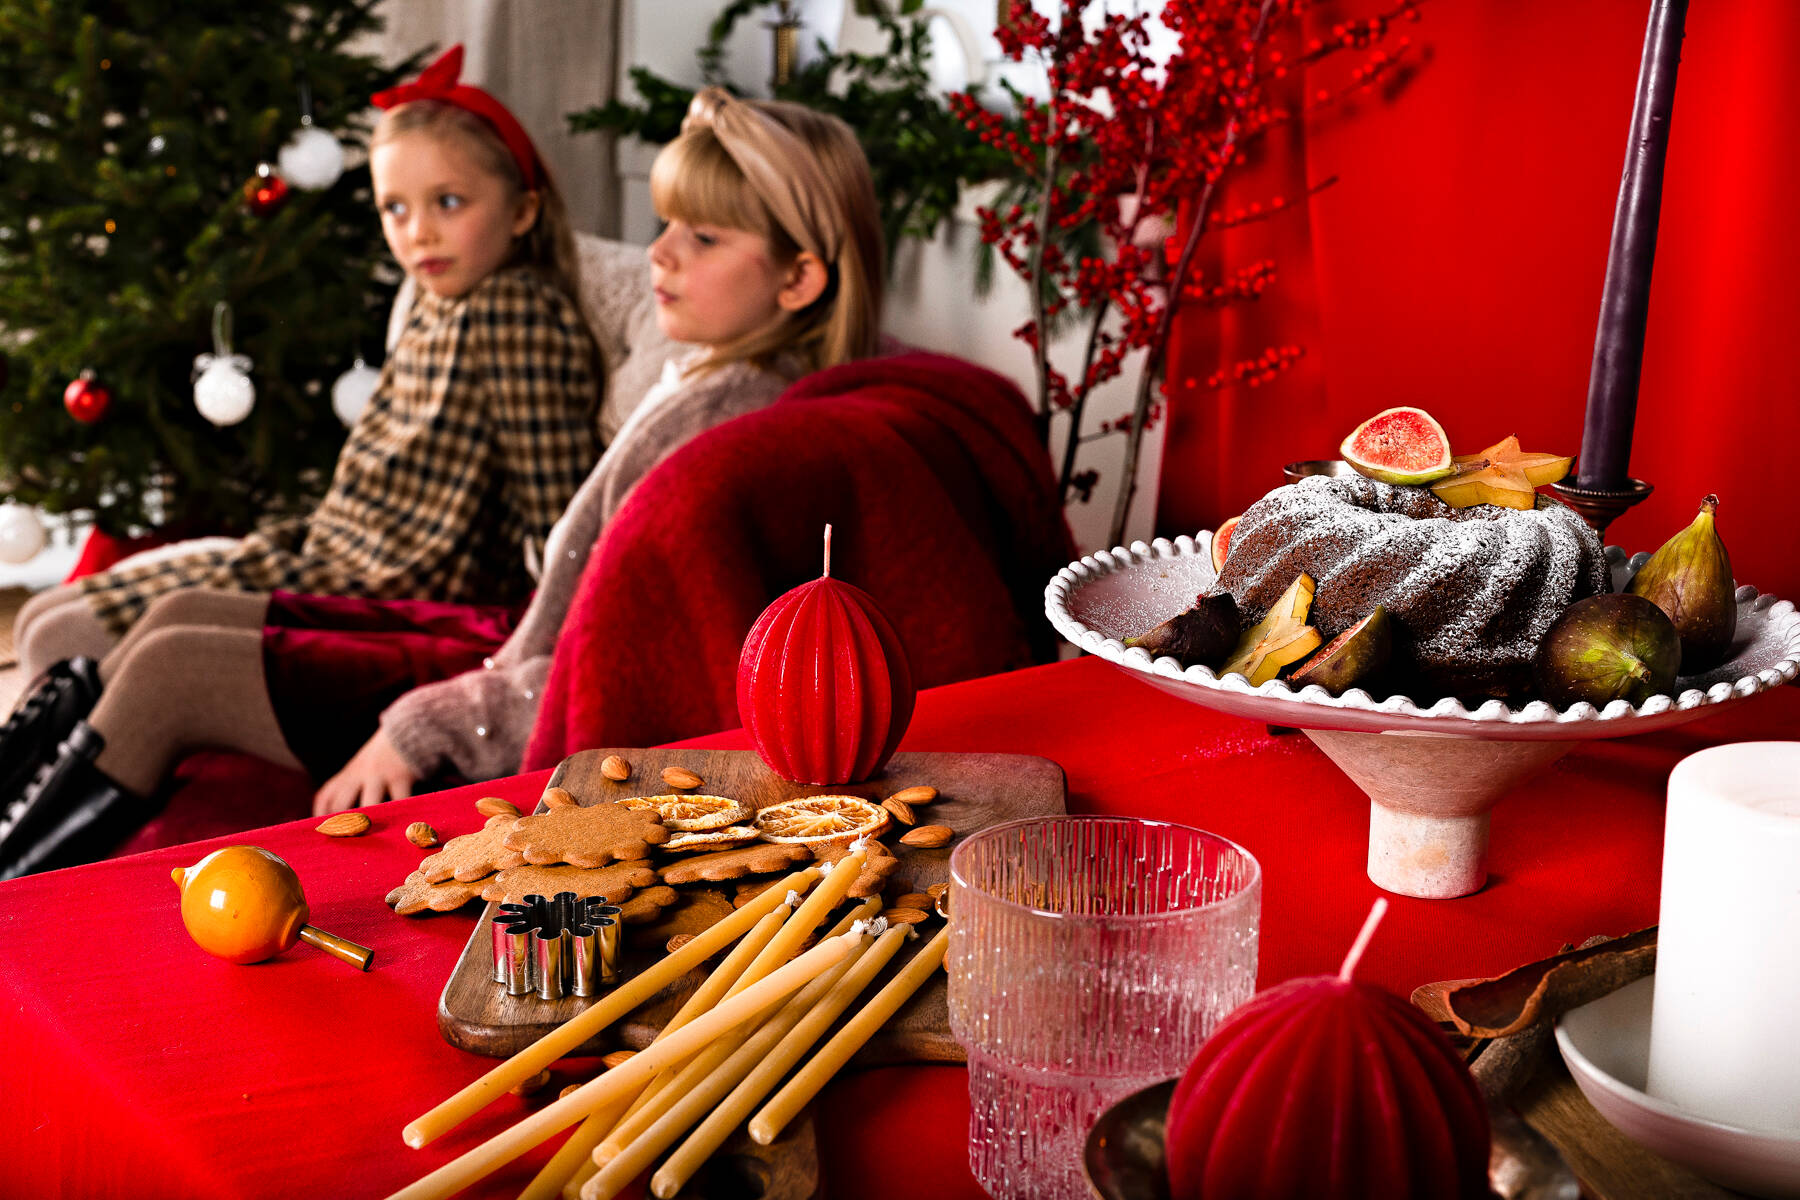 children on a couch and Christmas treats and delicacies on a table